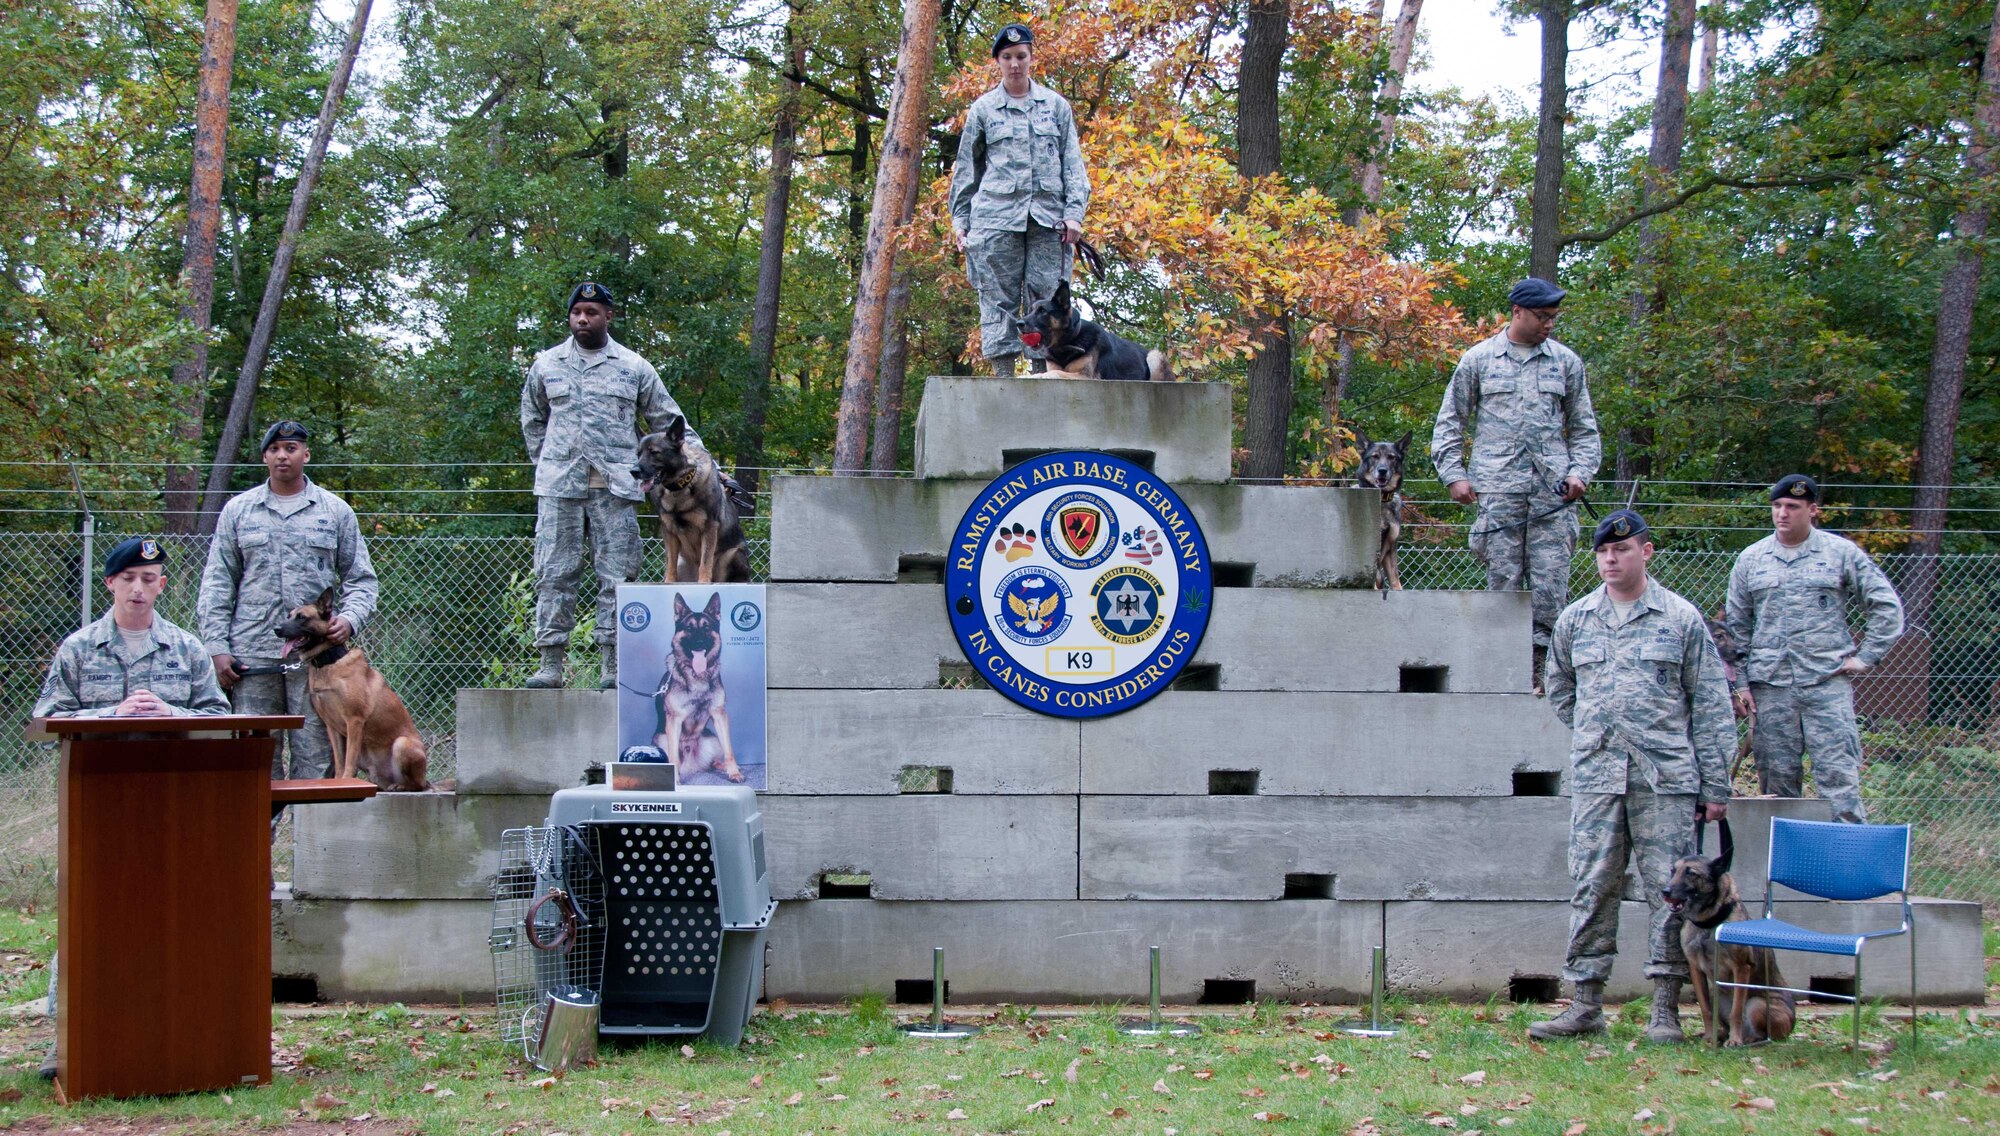 On Wednesday, October 16th, Ramstein Air Base’s 86th Security Forces Squadron held a memorial and retirement service for Military Working Dogs. The host and coordinator for the event was Technical Sargent Nicholas Ramsey, who also narrated the event. 